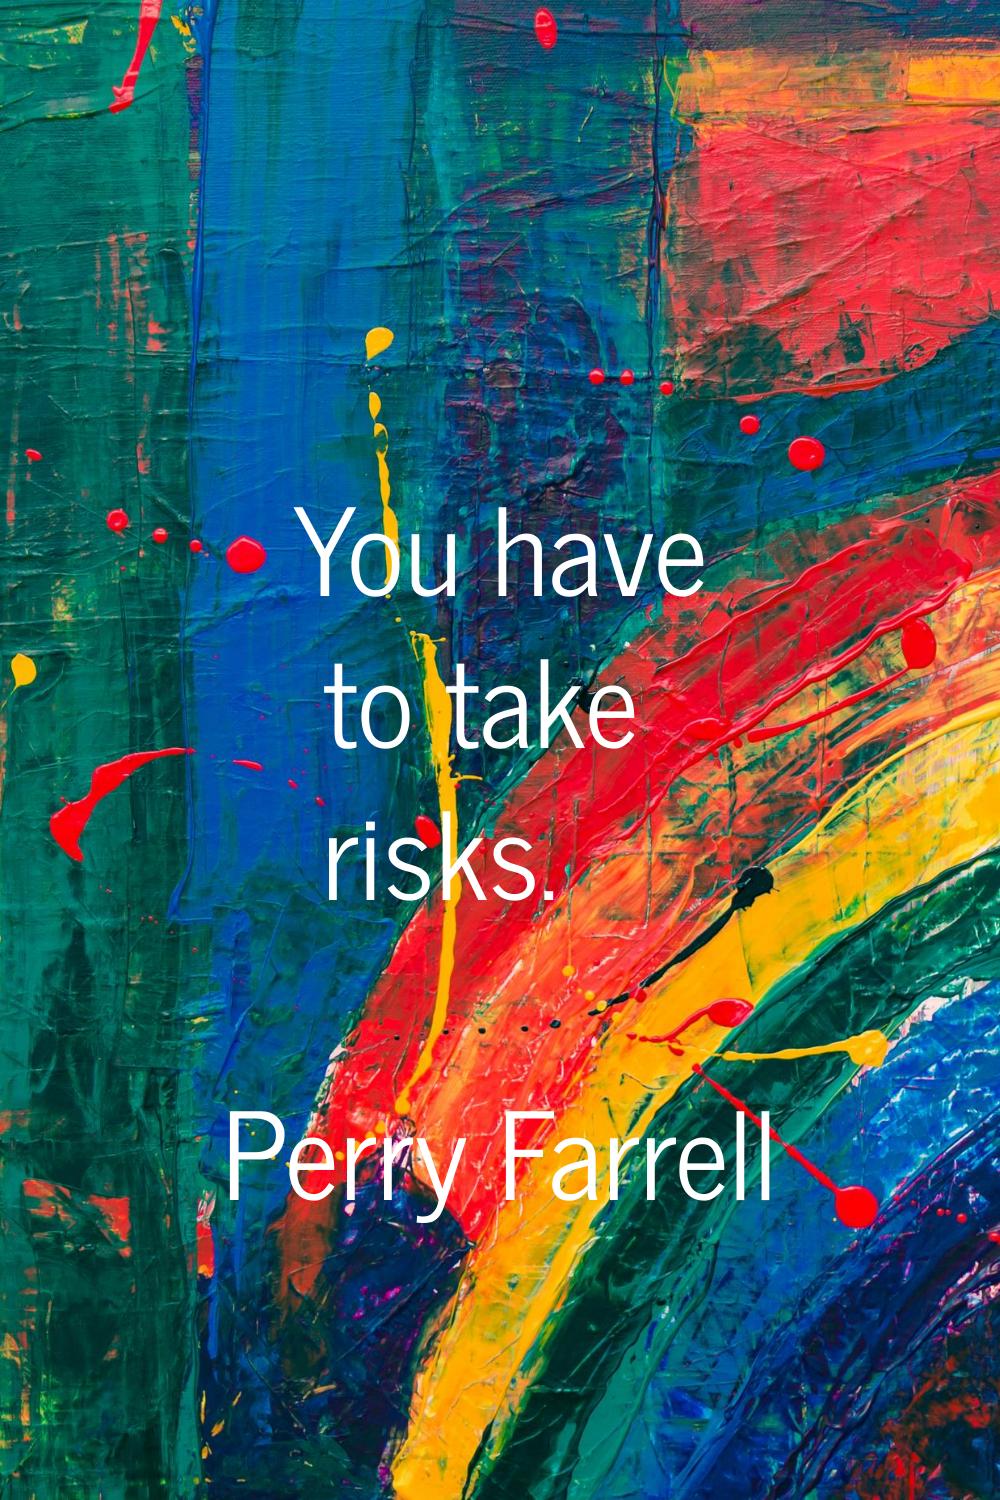 You have to take risks.